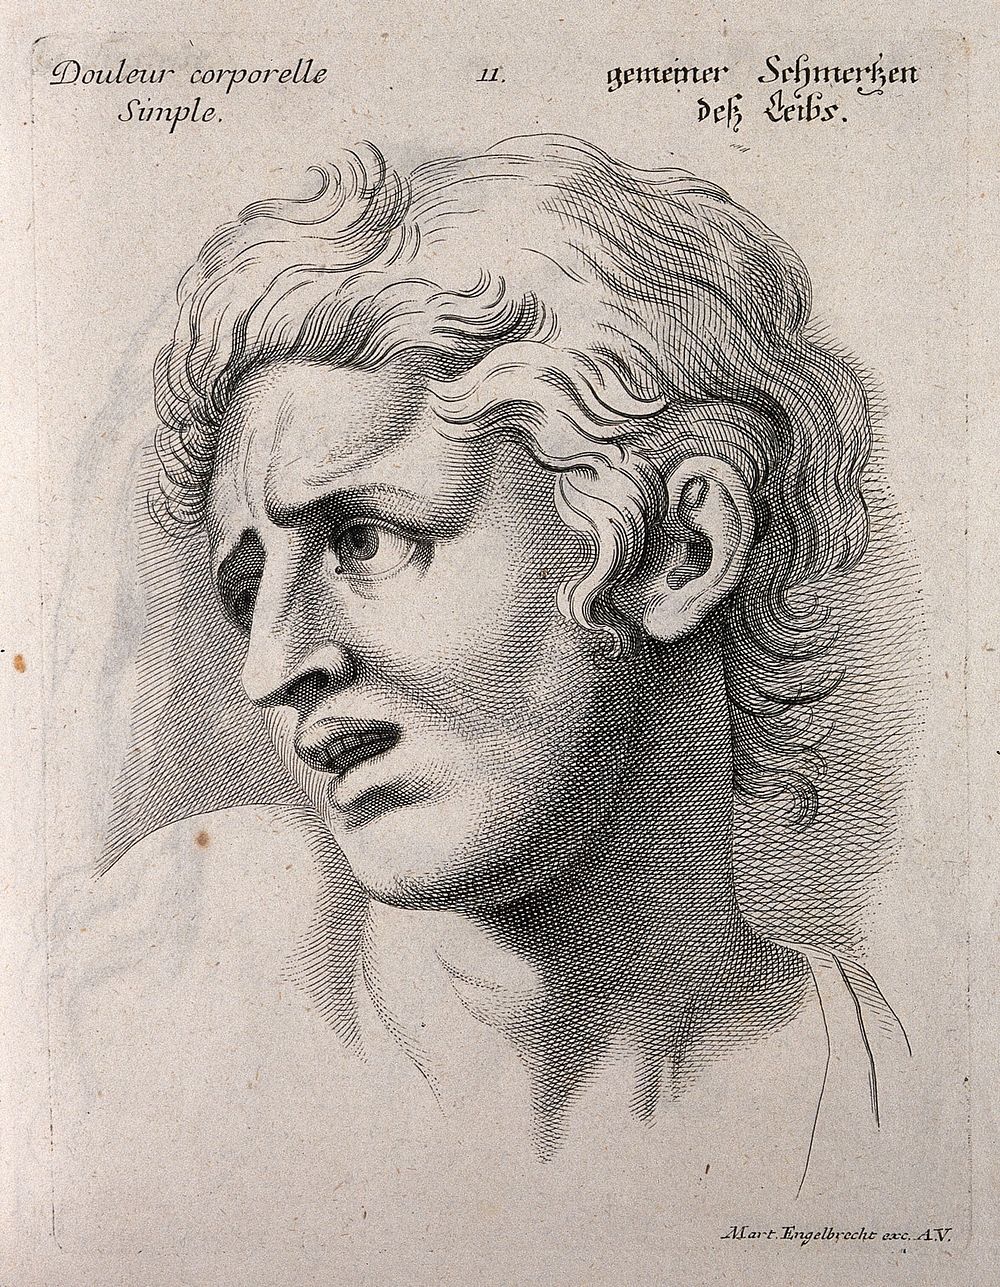 The face of a man expressing simple bodily pain. Engraving by M. Engelbrecht , 1732, after C. Le Brun.